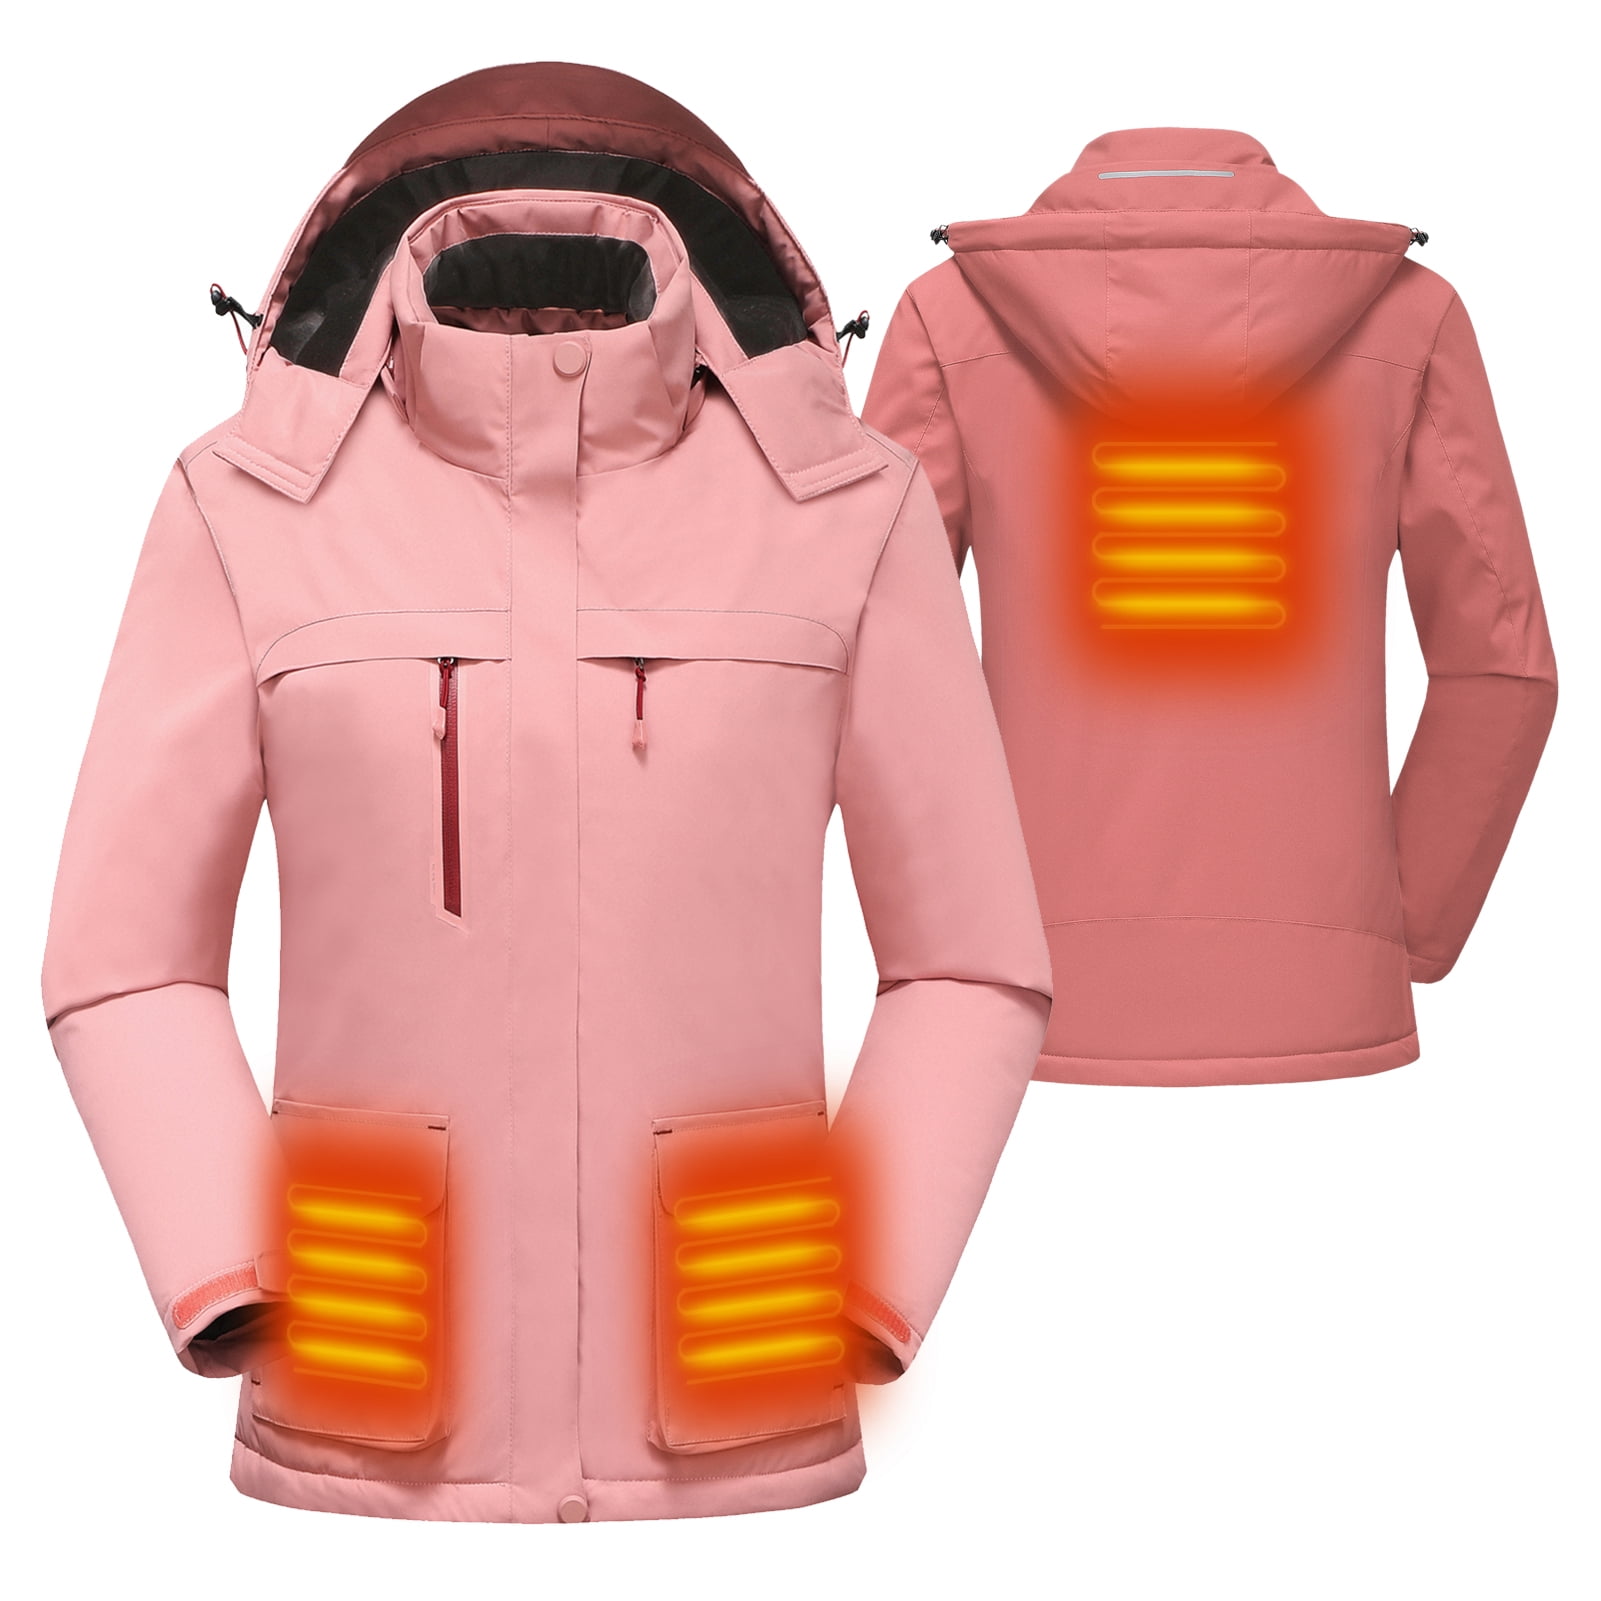 Details about   Heated Vest Jacket 9 Heating Zones USB Men Winter Electrically Sleeveless Coat 